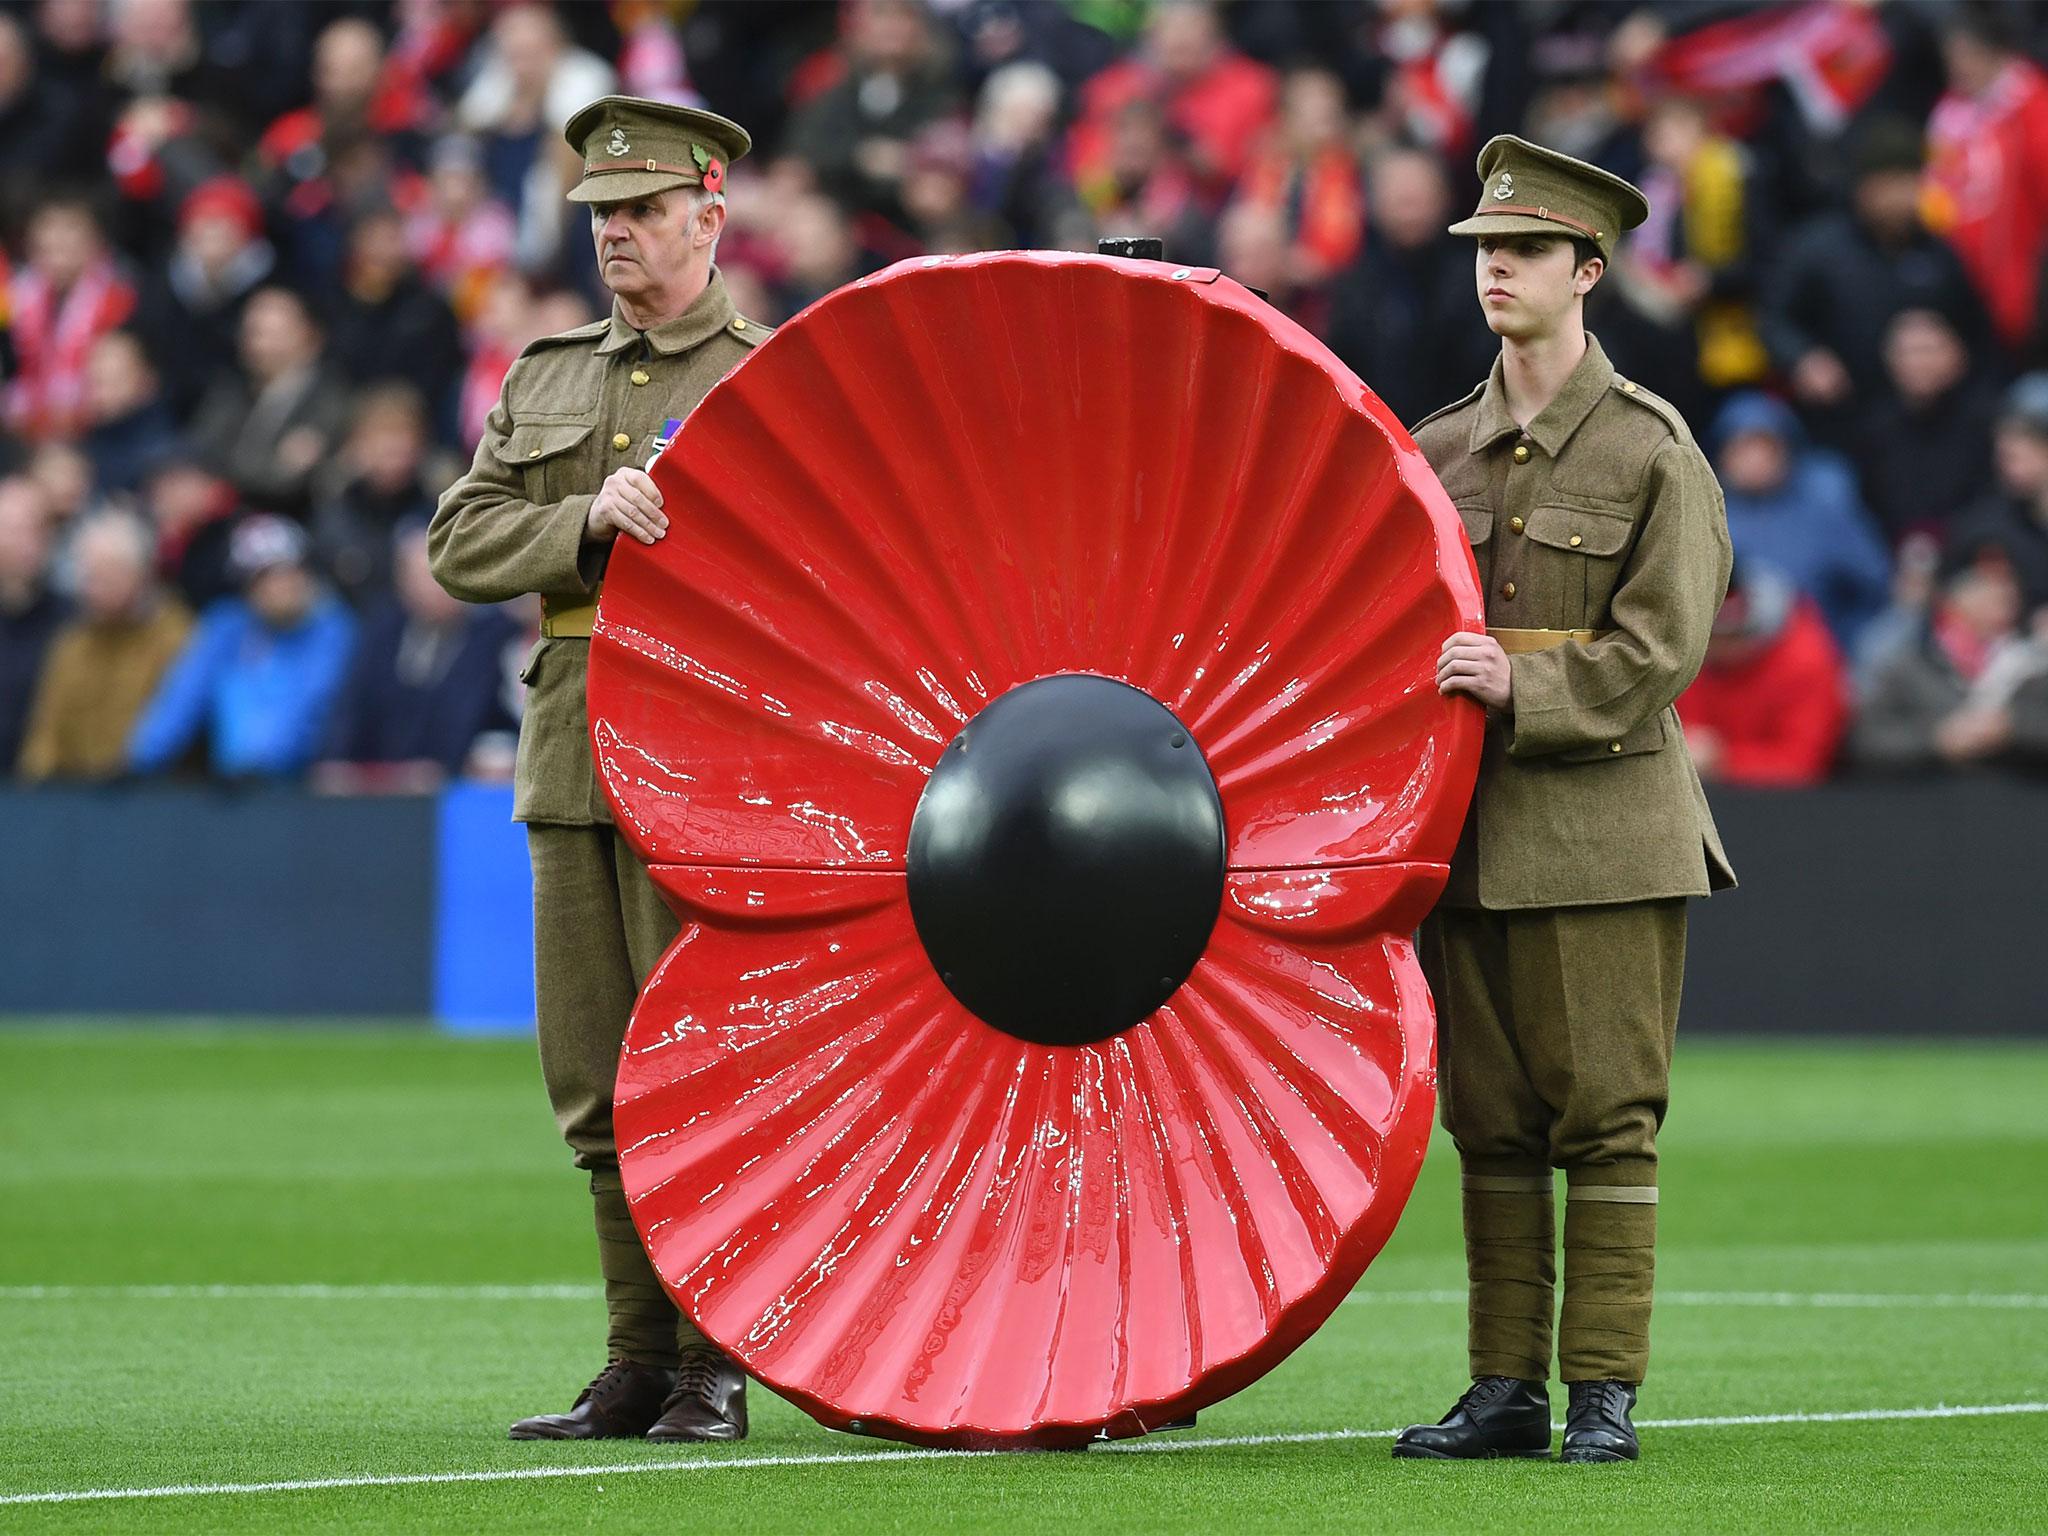 Do not politicise Remembrance Day, do not politicise the wearing of a poppy this Sunday